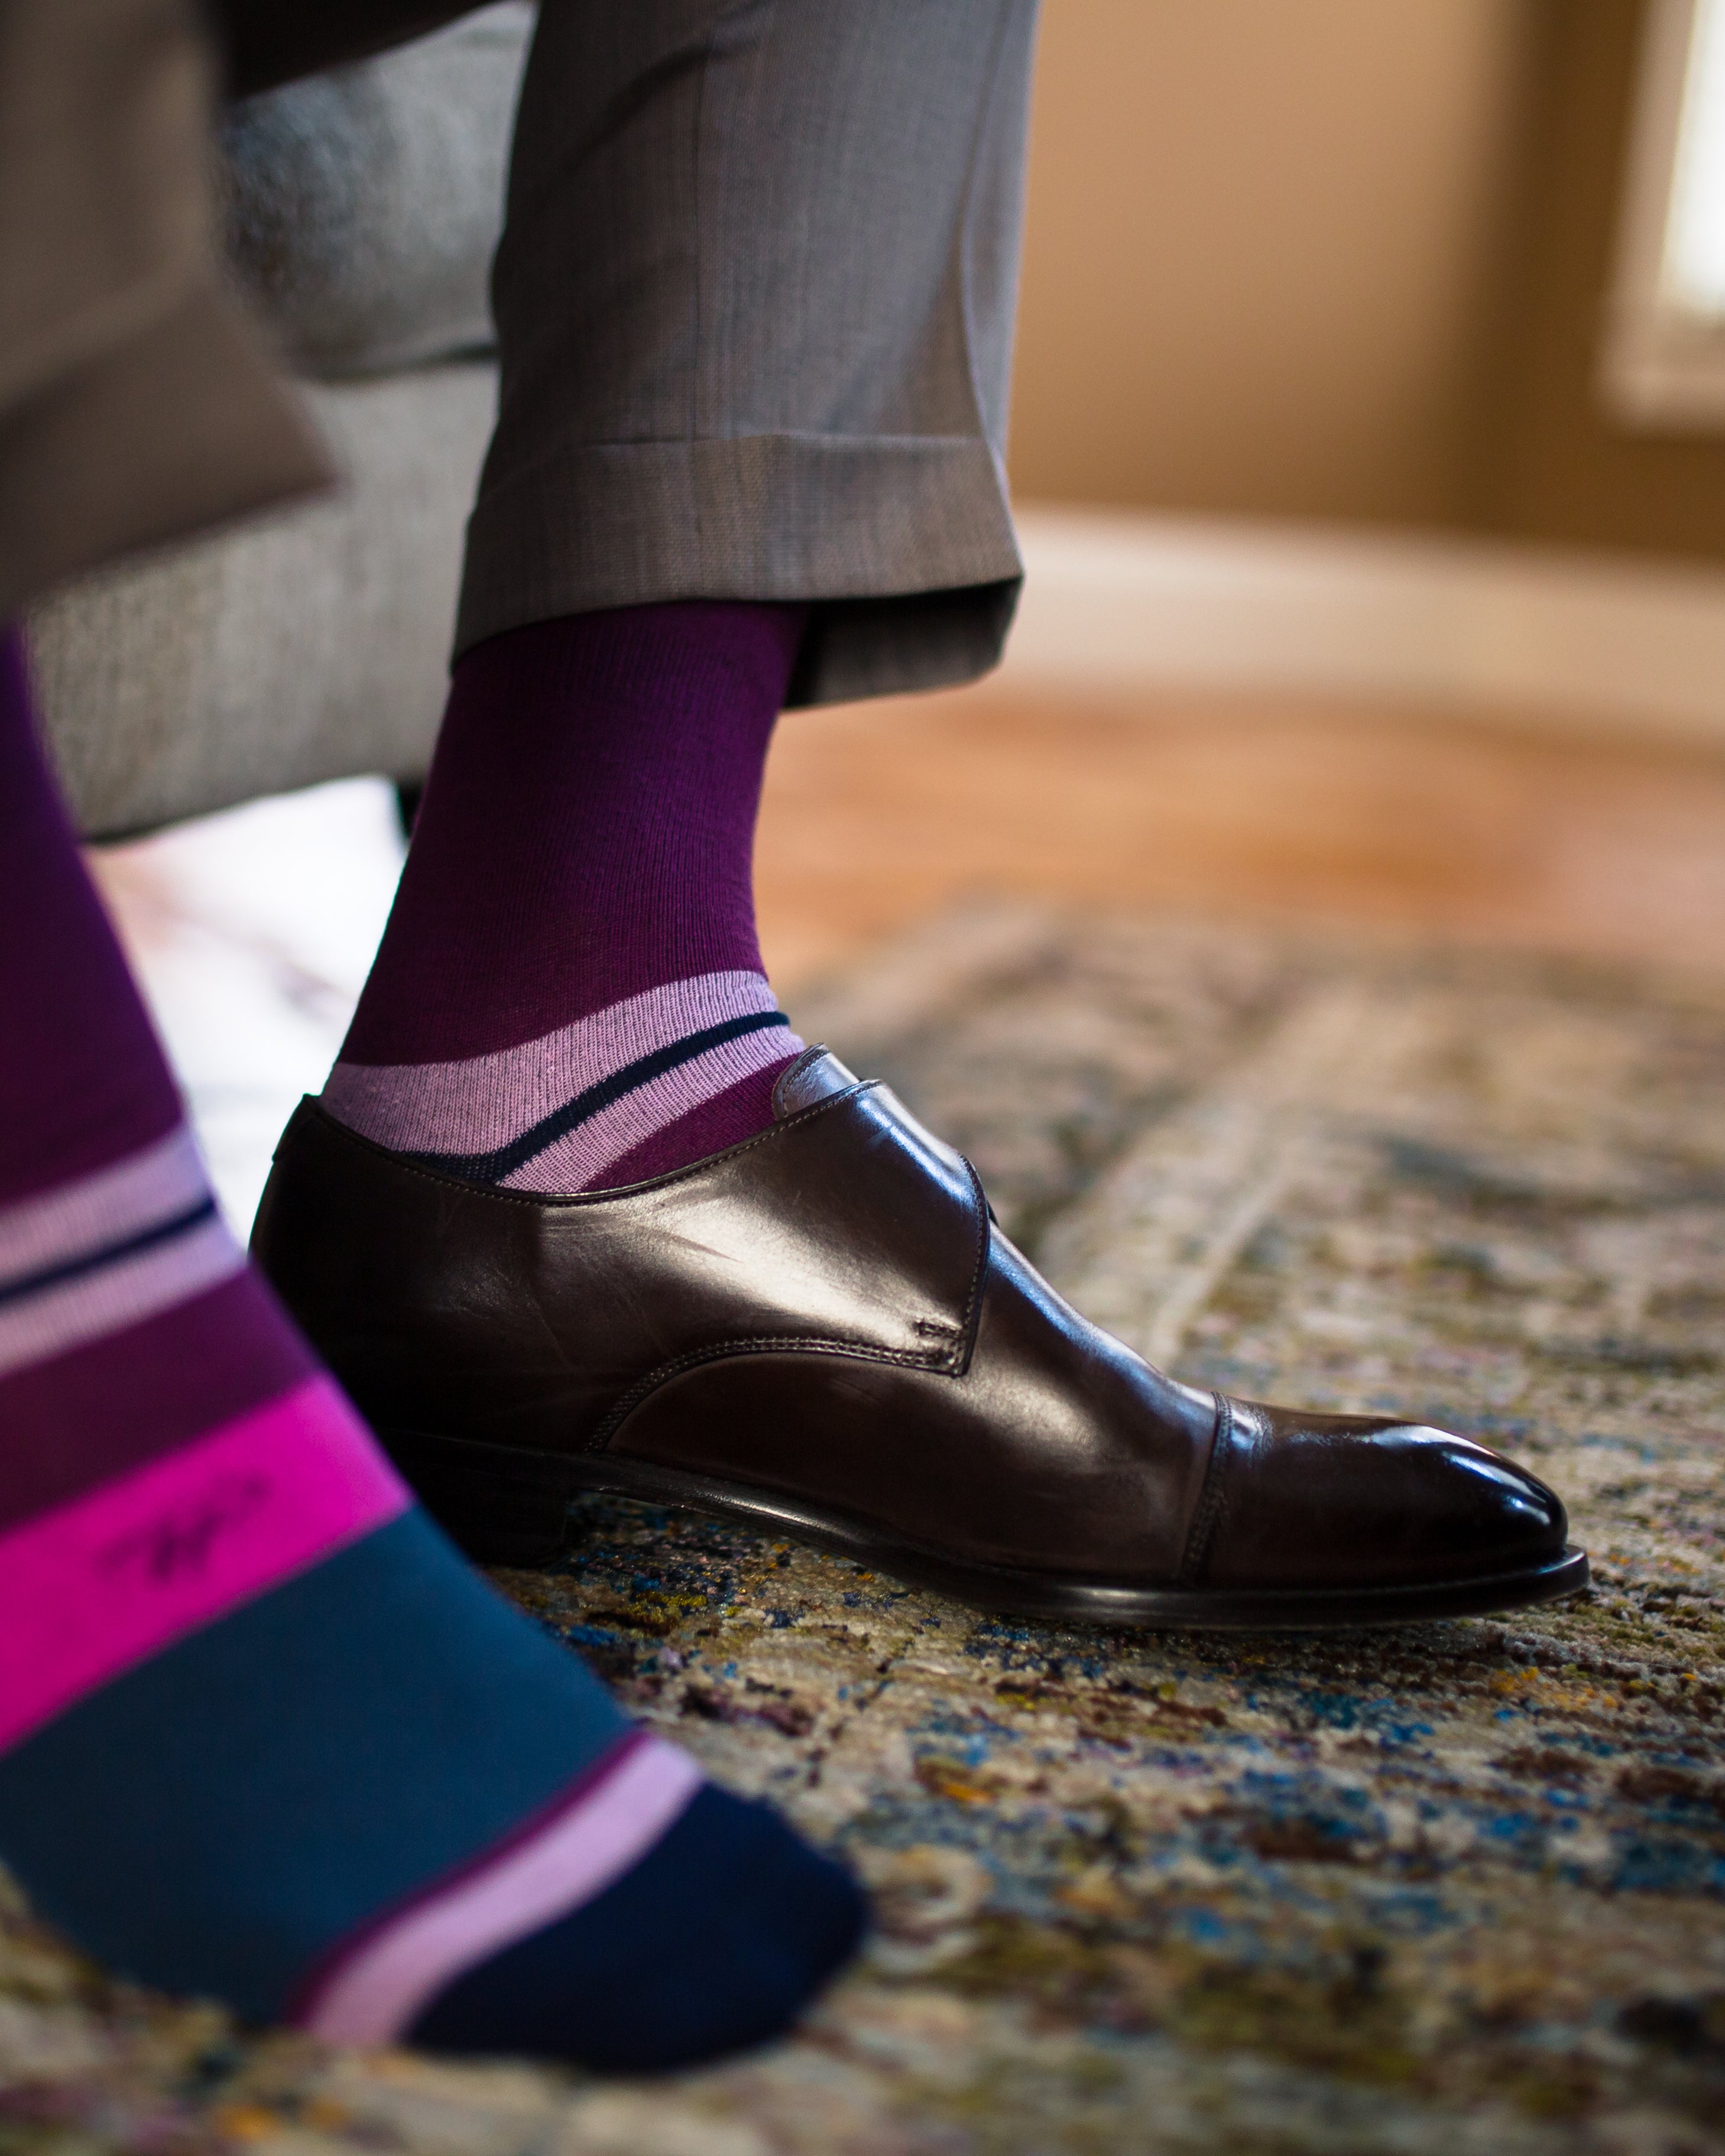 burgundy over the calf dress socks with navy and pink stripes, brown dress shoe, light brown dress pants